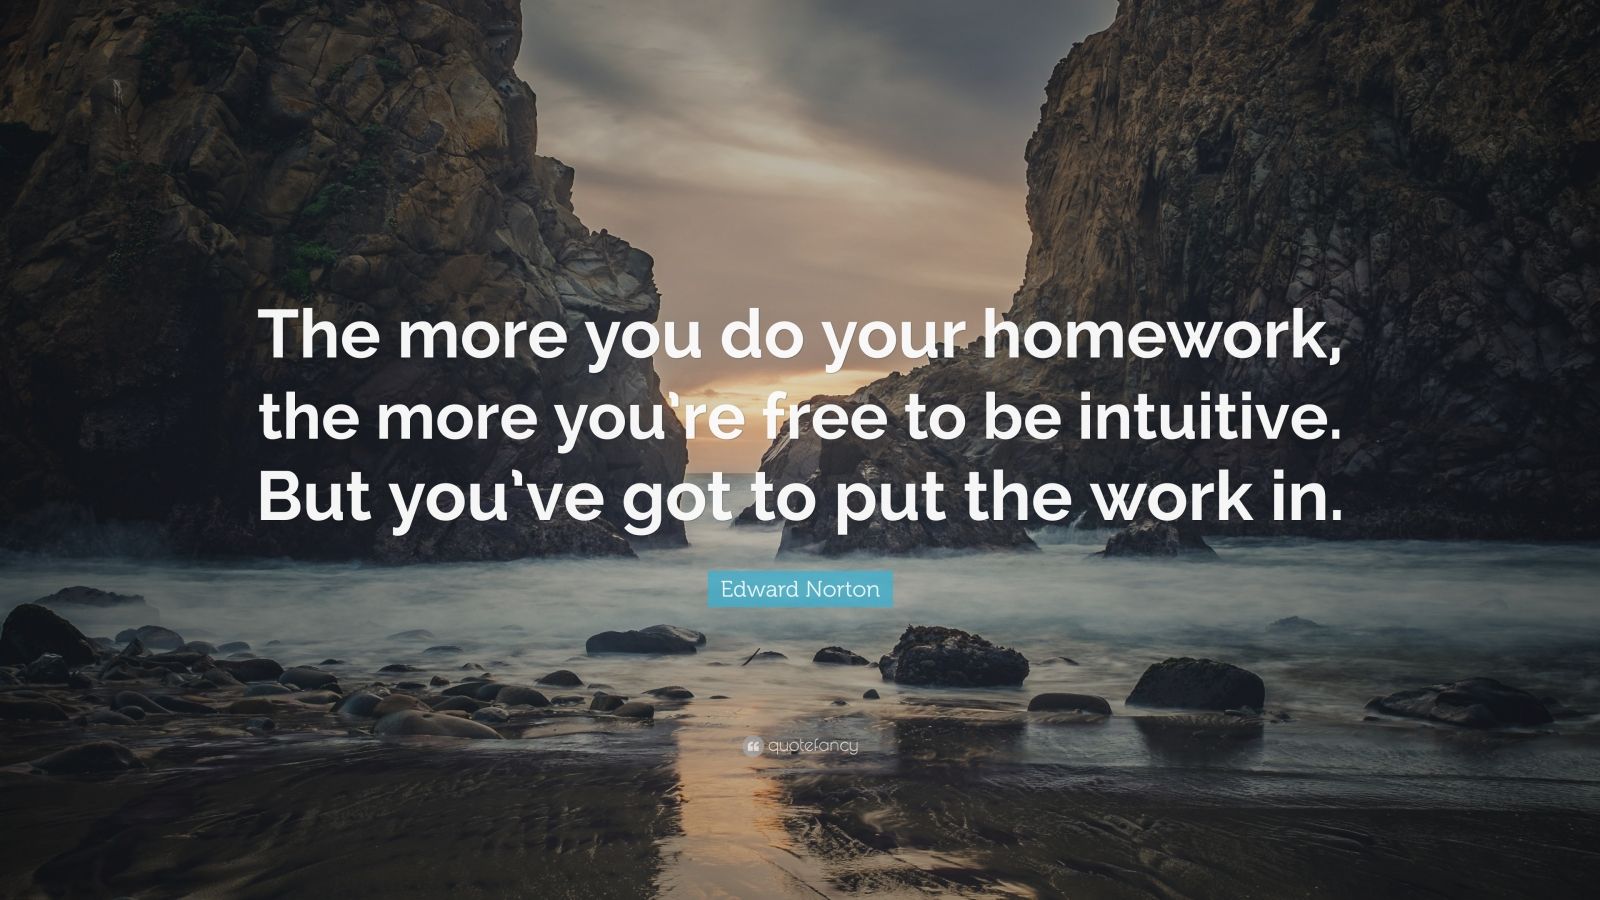 quote for a homework